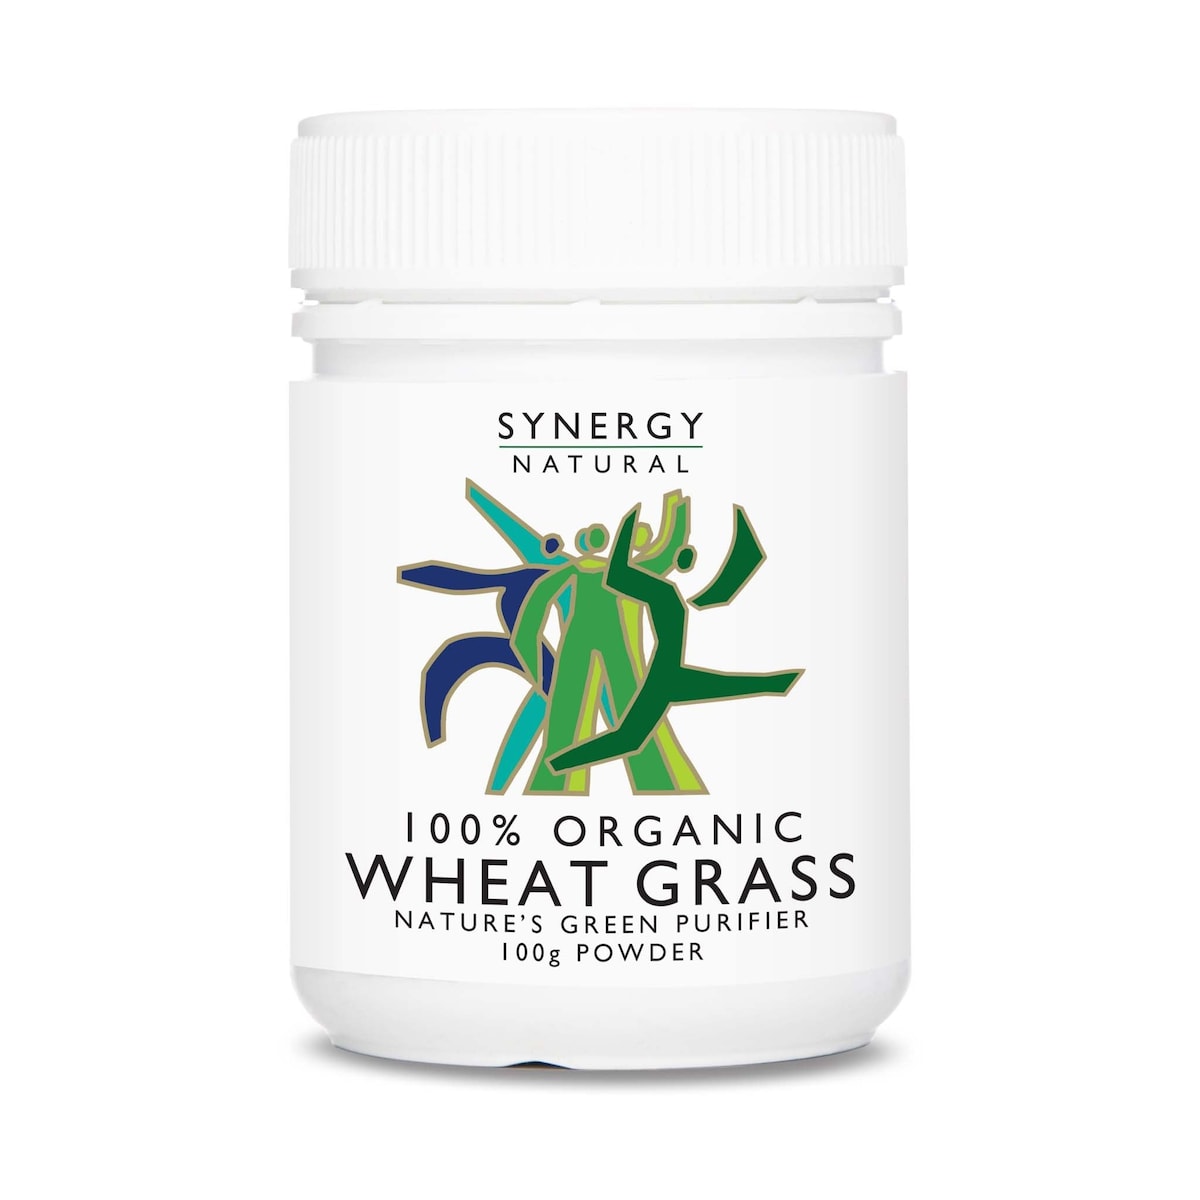 Synergy Natural Organic Wheat Grass 100g